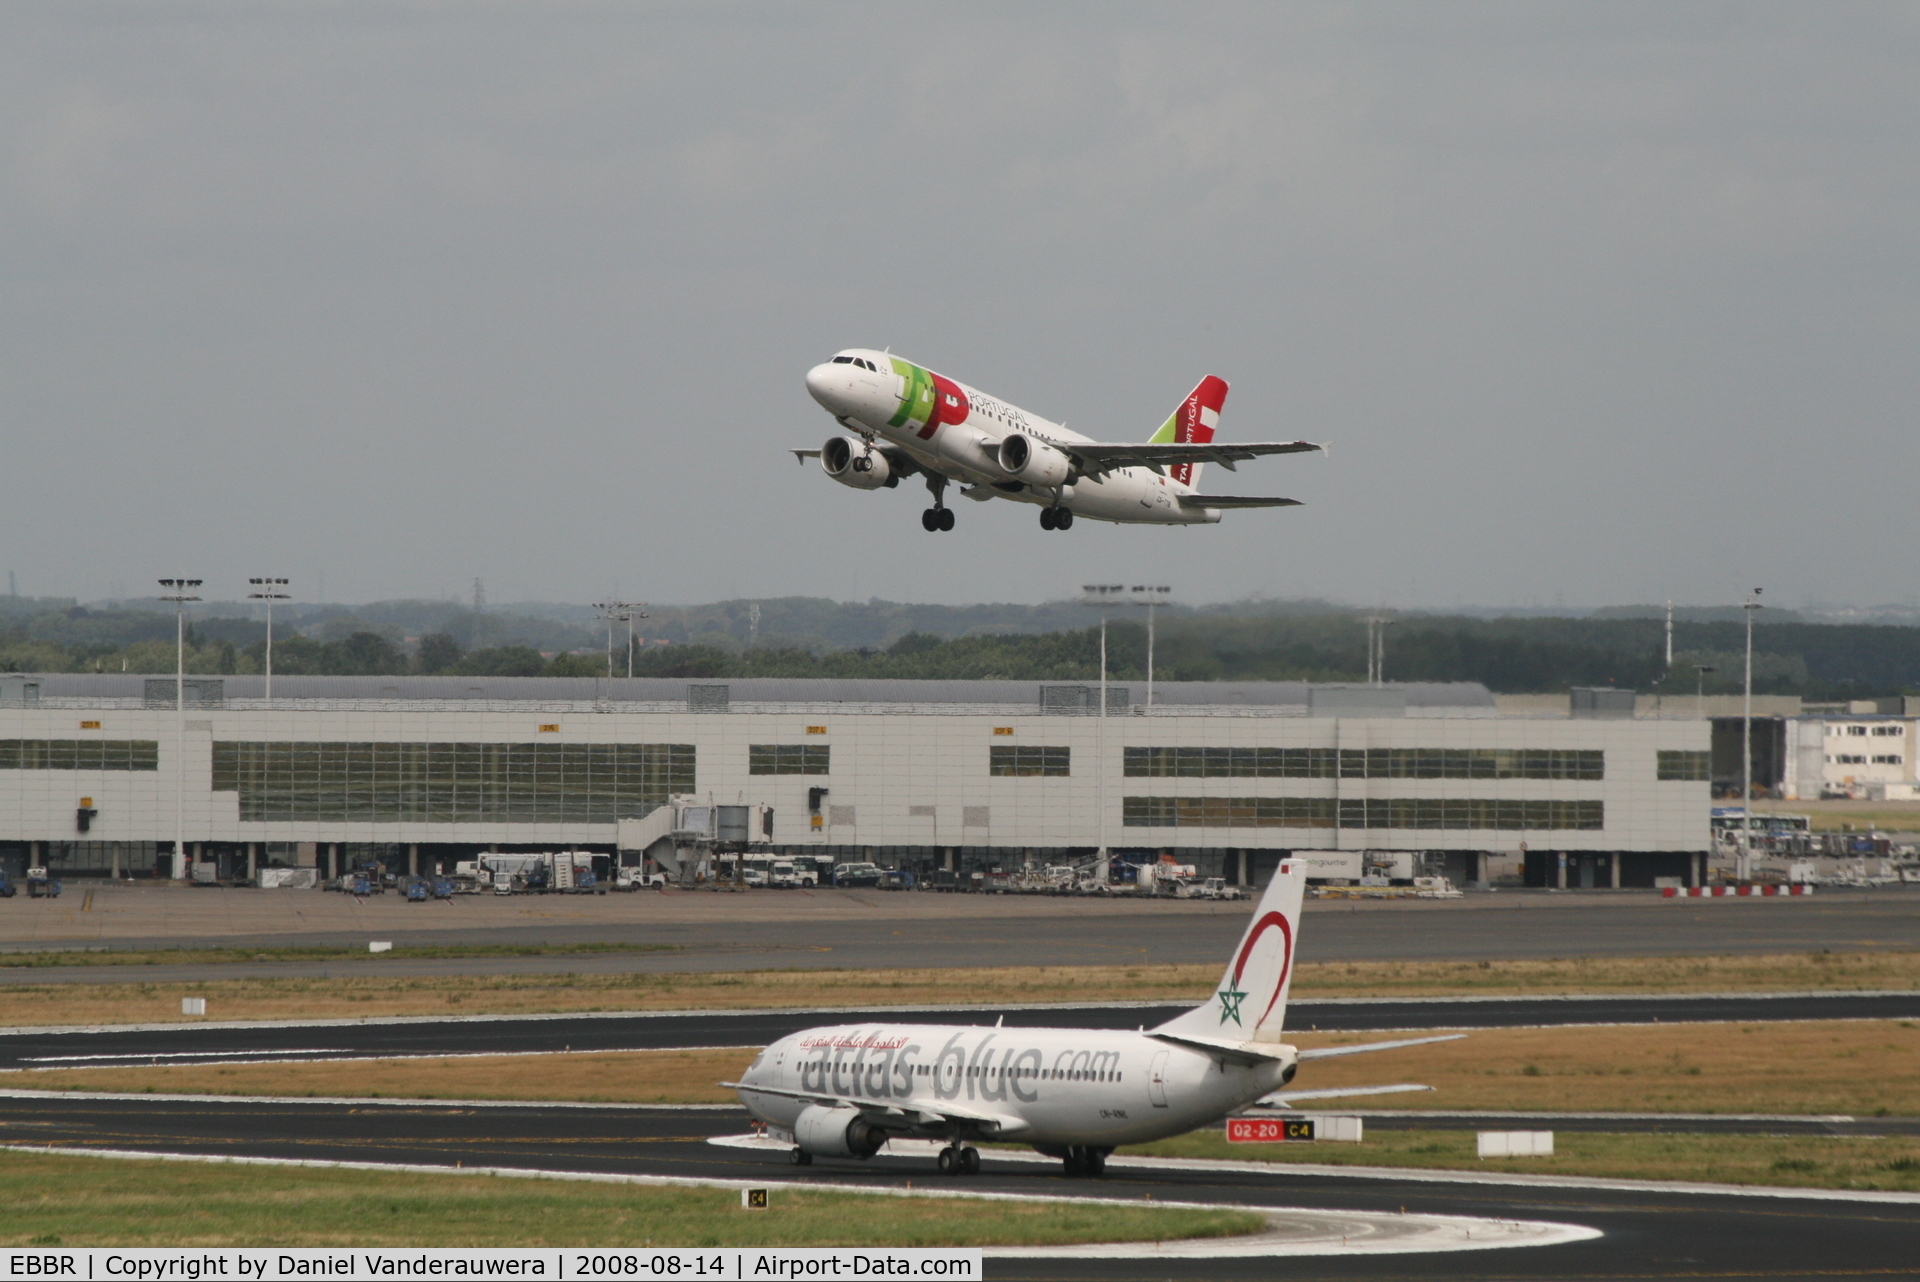 Brussels Airport, Brussels / Zaventem   Belgium (EBBR) - flight TP605 (A319-111 - CS-TTB) is taking off from rwy 20.  In background is Pier B - 